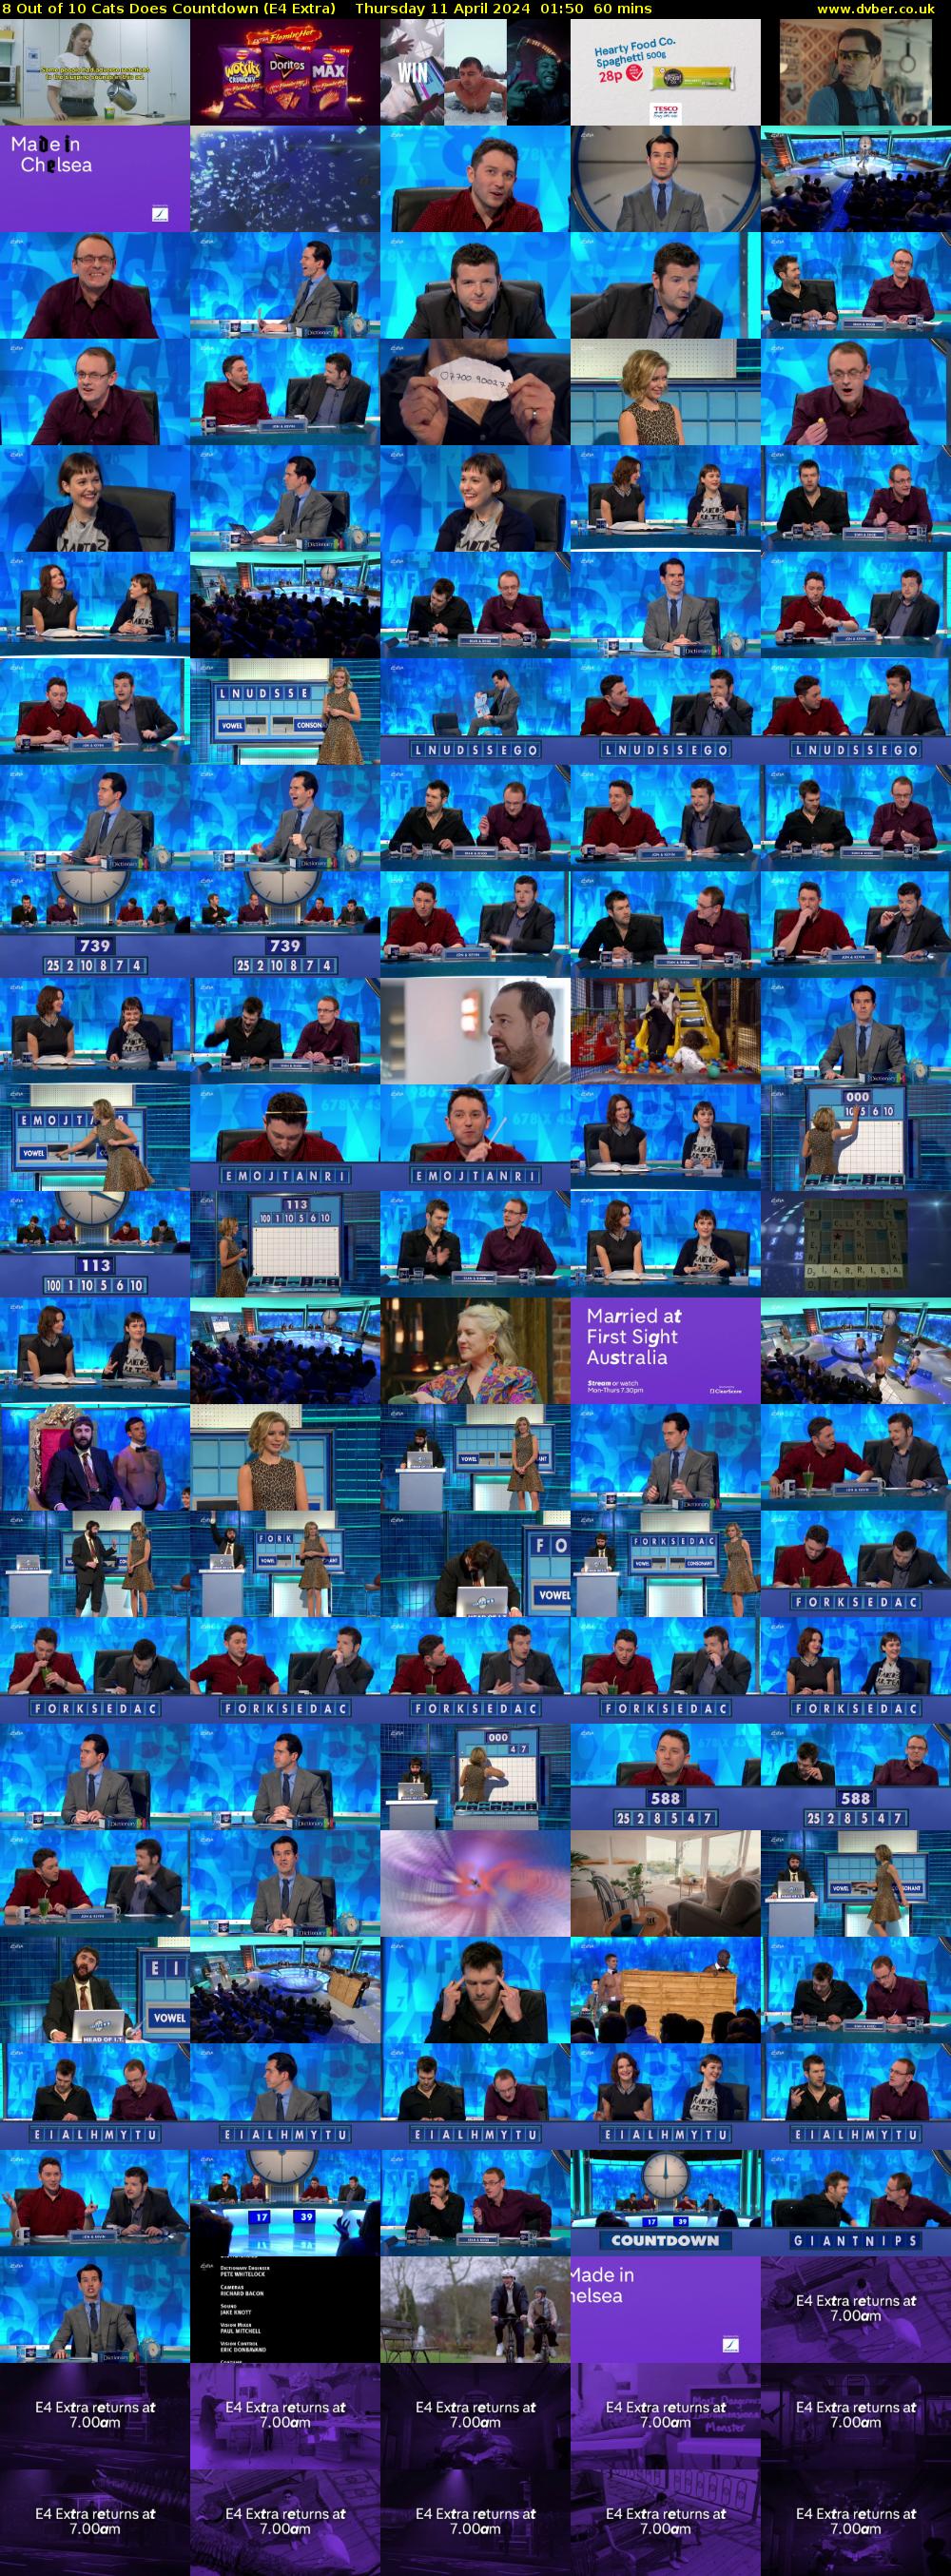 8 Out of 10 Cats Does Countdown (E4 Extra) Thursday 11 April 2024 01:50 - 02:50